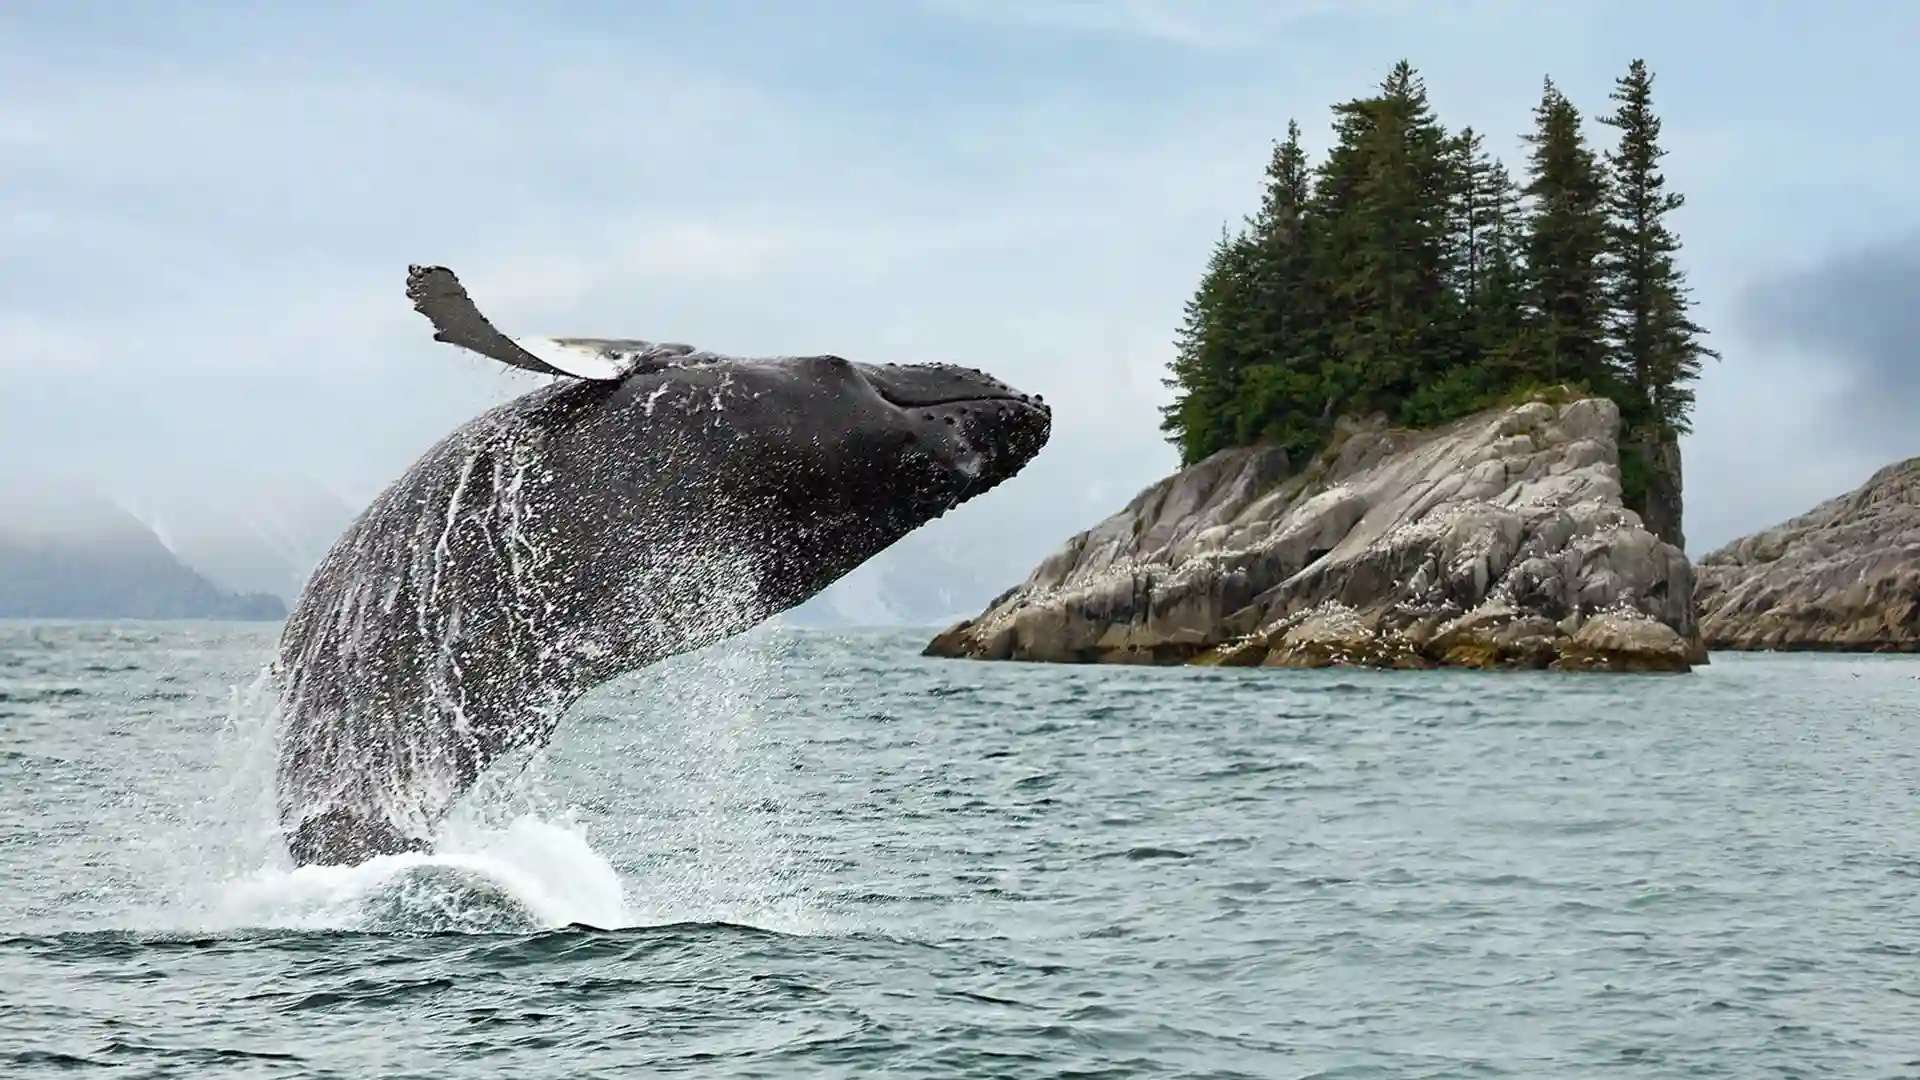 Whale jumping out of water near rocky land covered by trees.